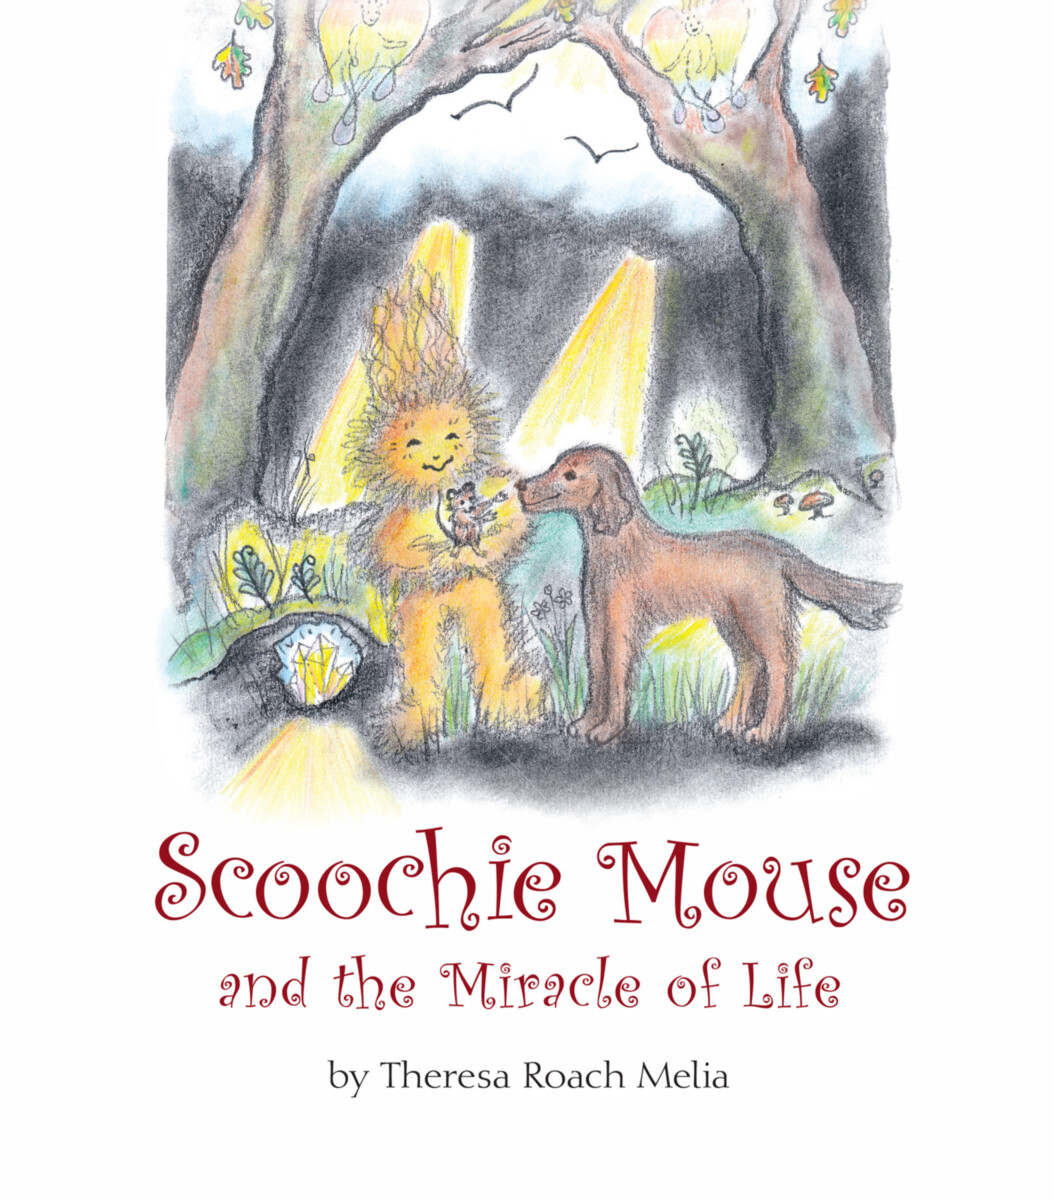 Scoochie Mouse and the Miracle of Life